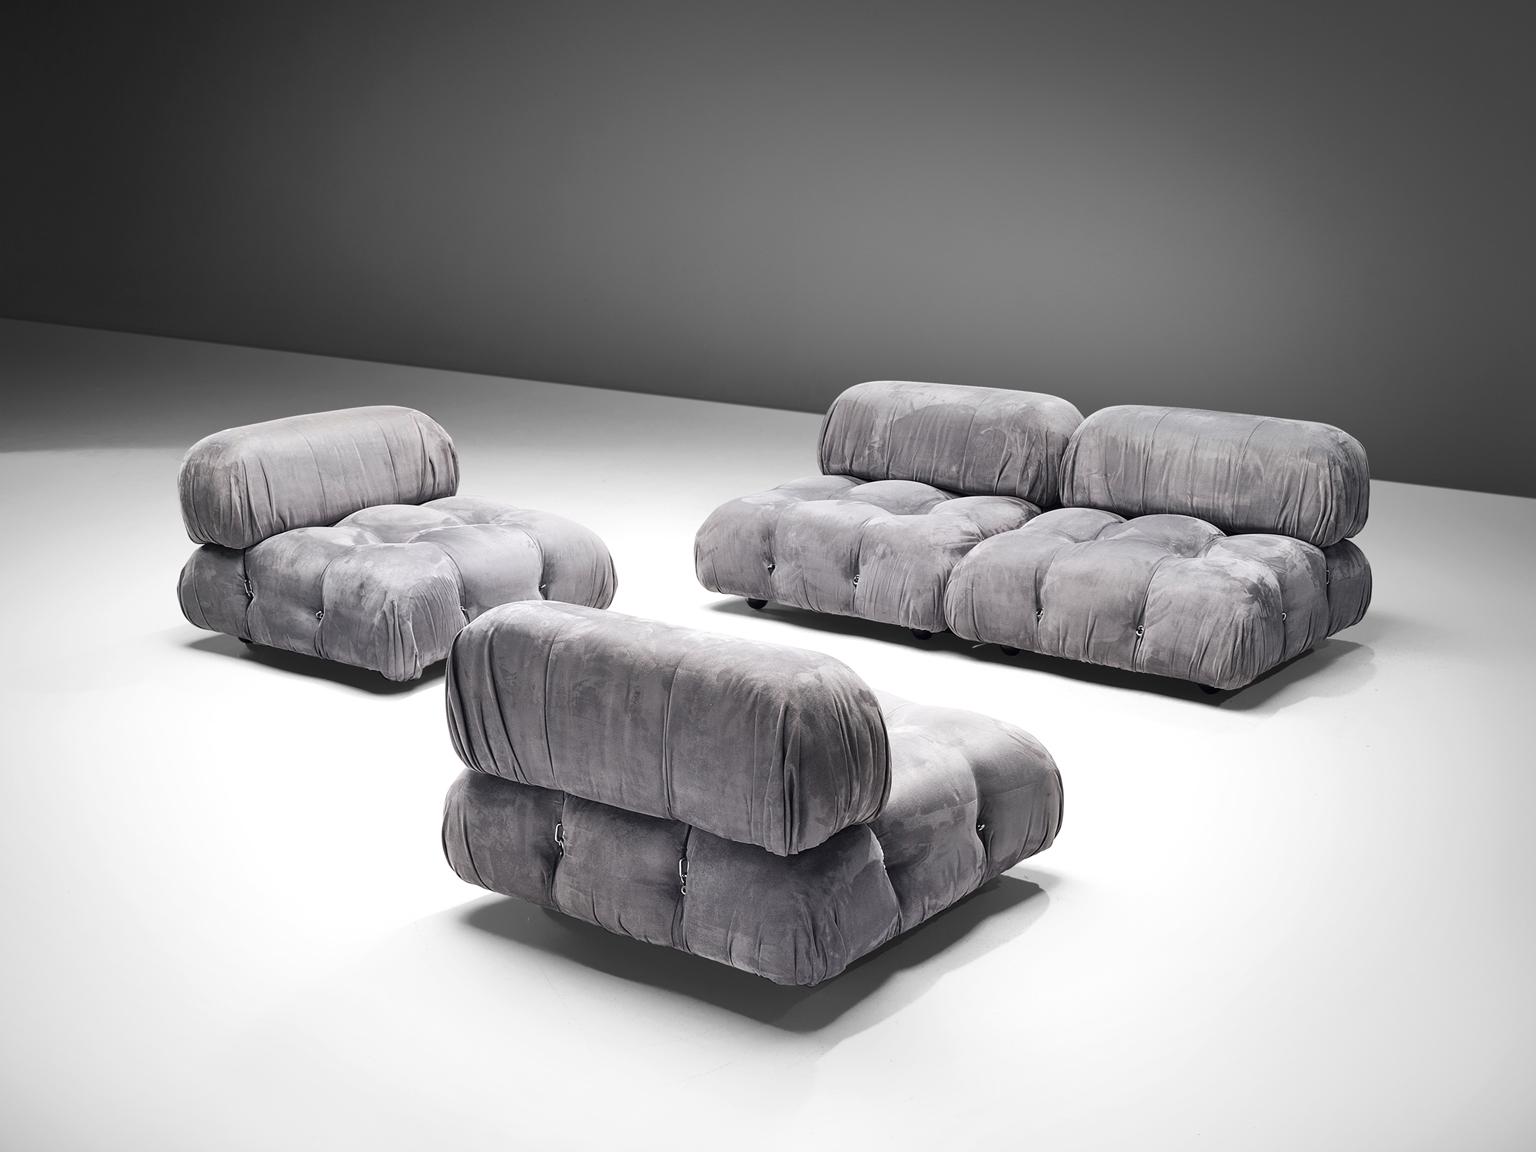 Mario Bellini, modular 'Cameleonda' sofa in grey alcantara fabric, Italy, 1972.

The sectional elements of this can be used freely and apart from one another. The backs are provided with rings and carabiners, which allows the user to create a